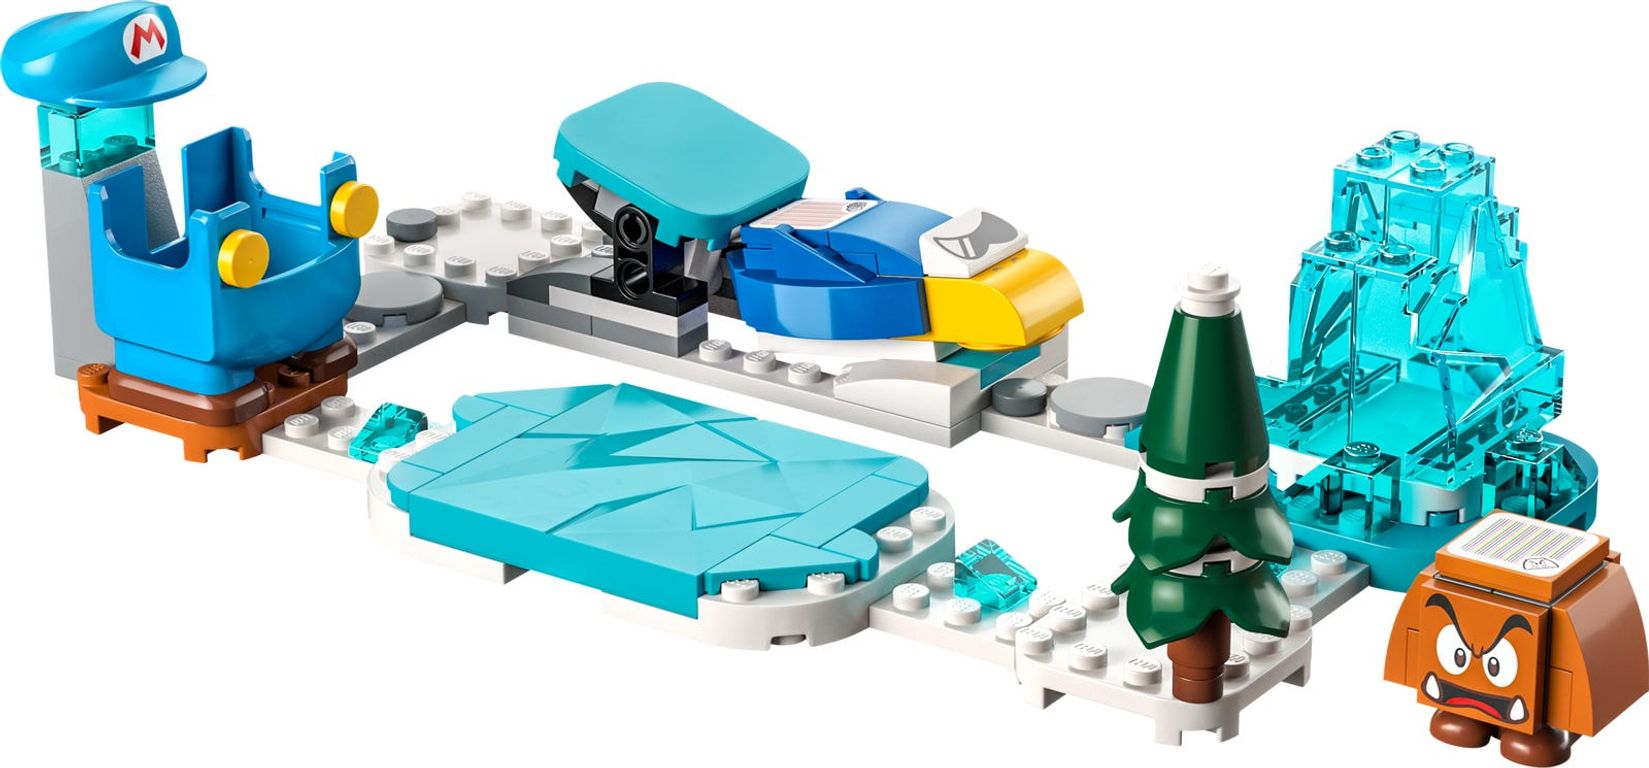 LEGO® Super Mario™ Ice Mario Suit and Frozen World Expansion Set components